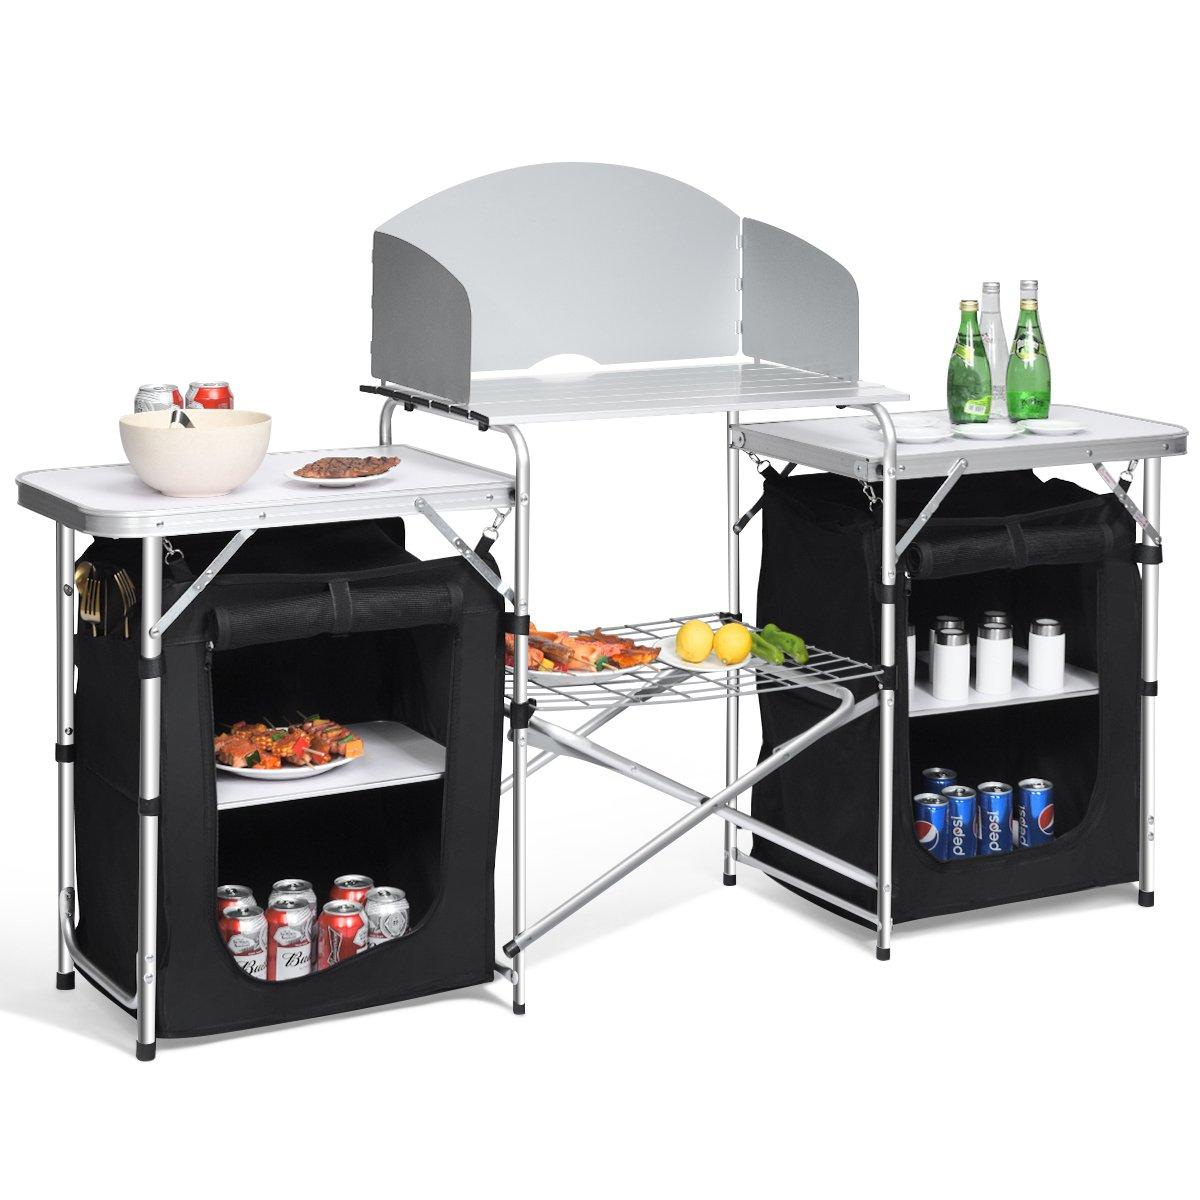 2 in 1 Folding Table Camping Kitchen Storage Aluminum Stand Table Cooking BBQ